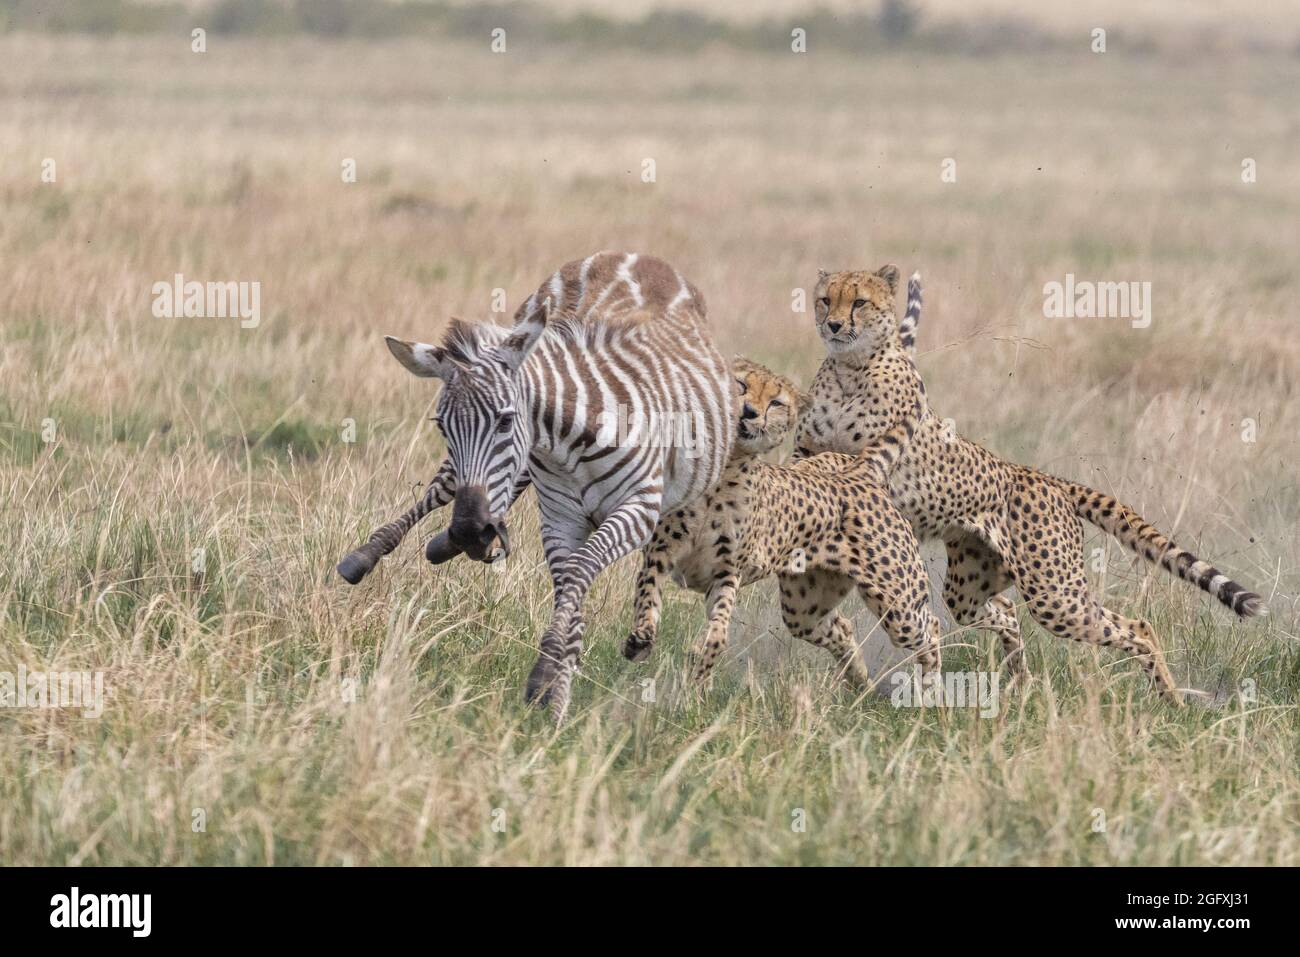 The cheetahs worked together to capture their prey. MAASAI MARA, KENYA: THRILLING photographs have captured the moment a coalition of cheetahs chased Stock Photo